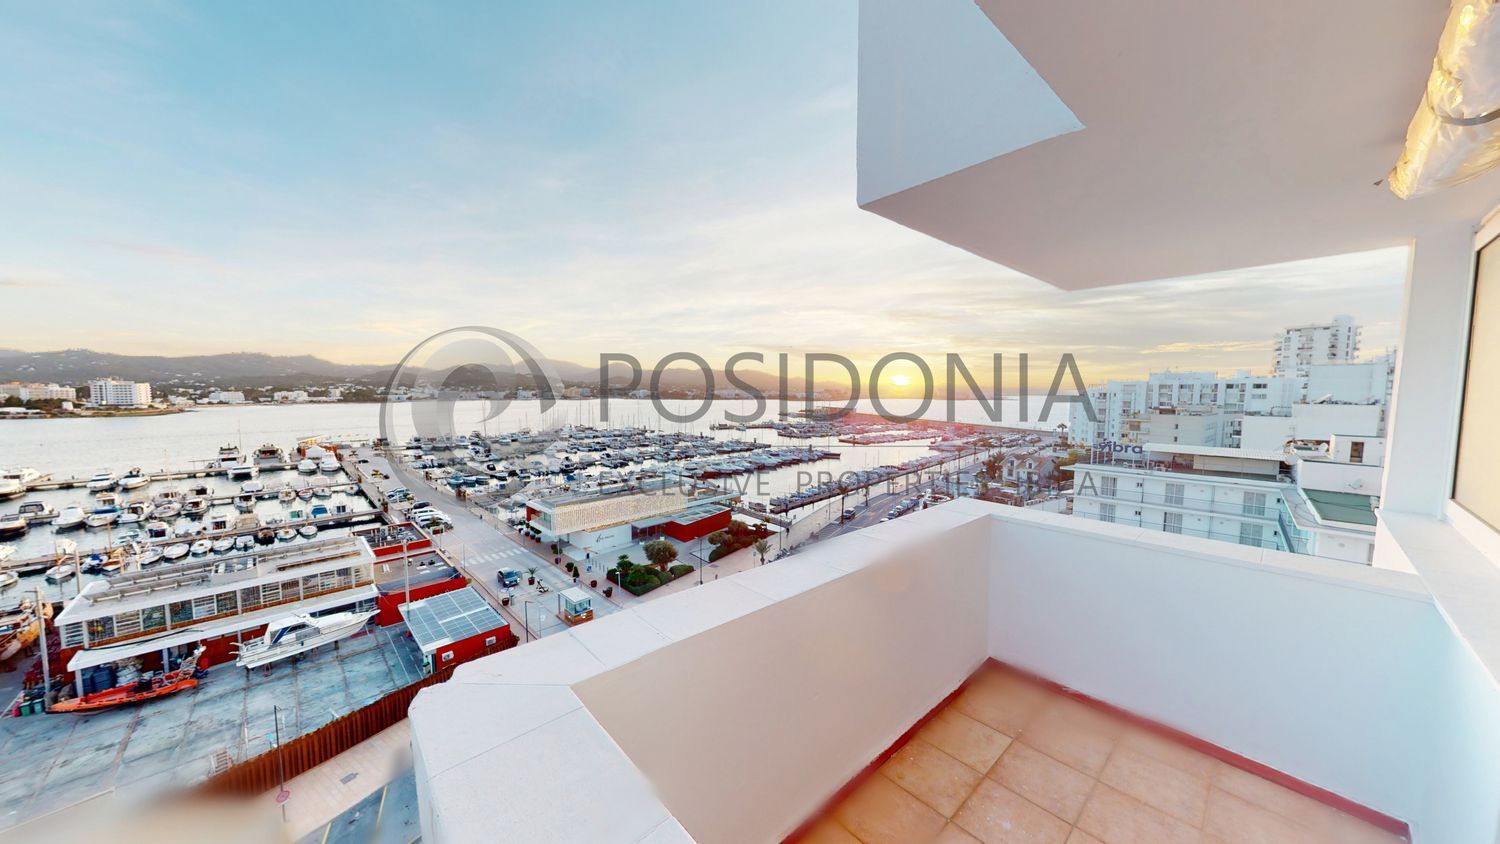 Apartment for sale on the seafront in Sant Antoni de Portmany, Ibiza